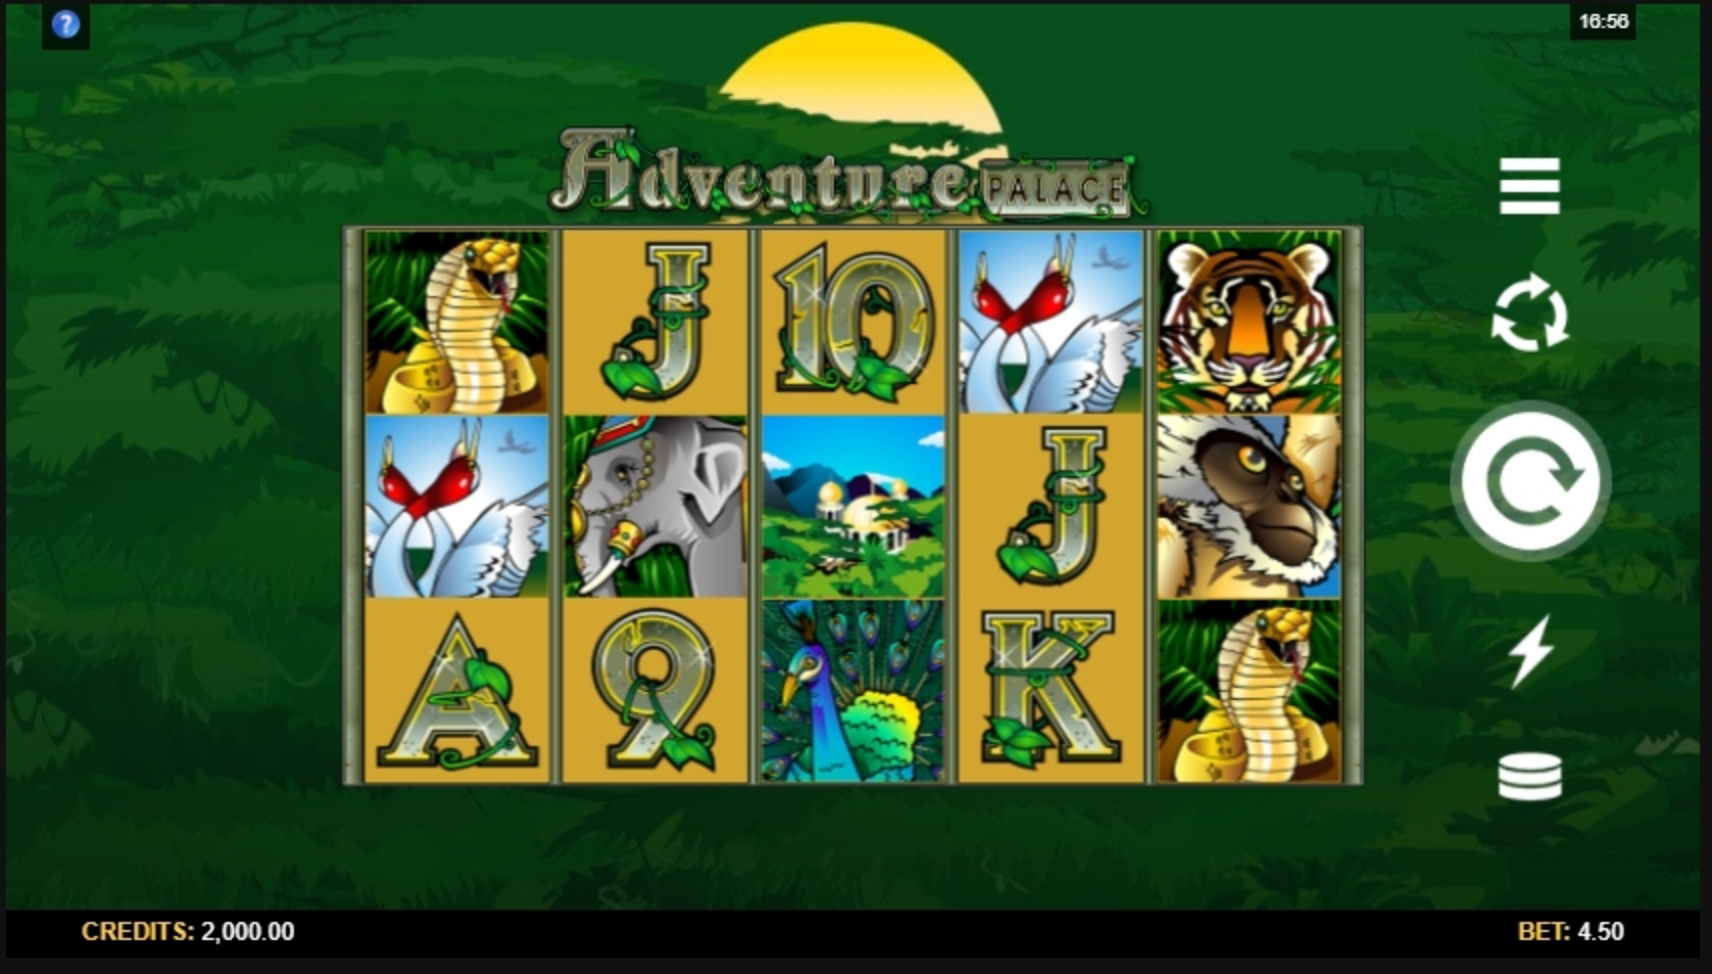 Reels in Adventure Palace Slot Game by Microgaming